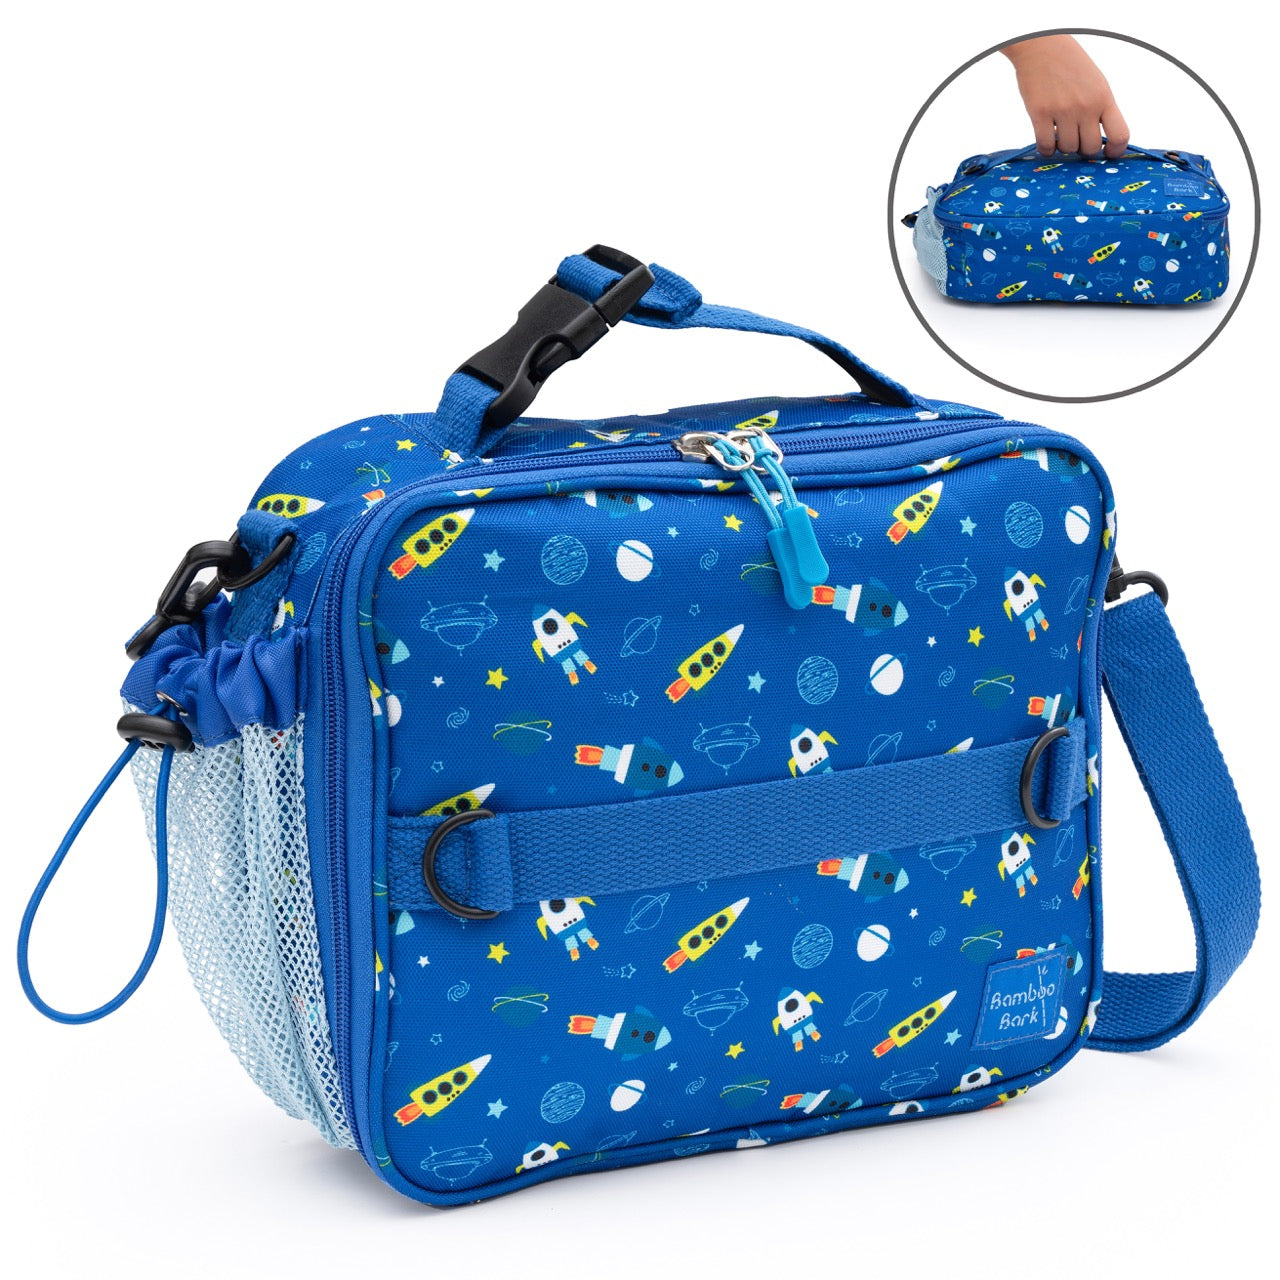 Bamboo Bark Space print insulated Lunch Bag with 3 carrying options